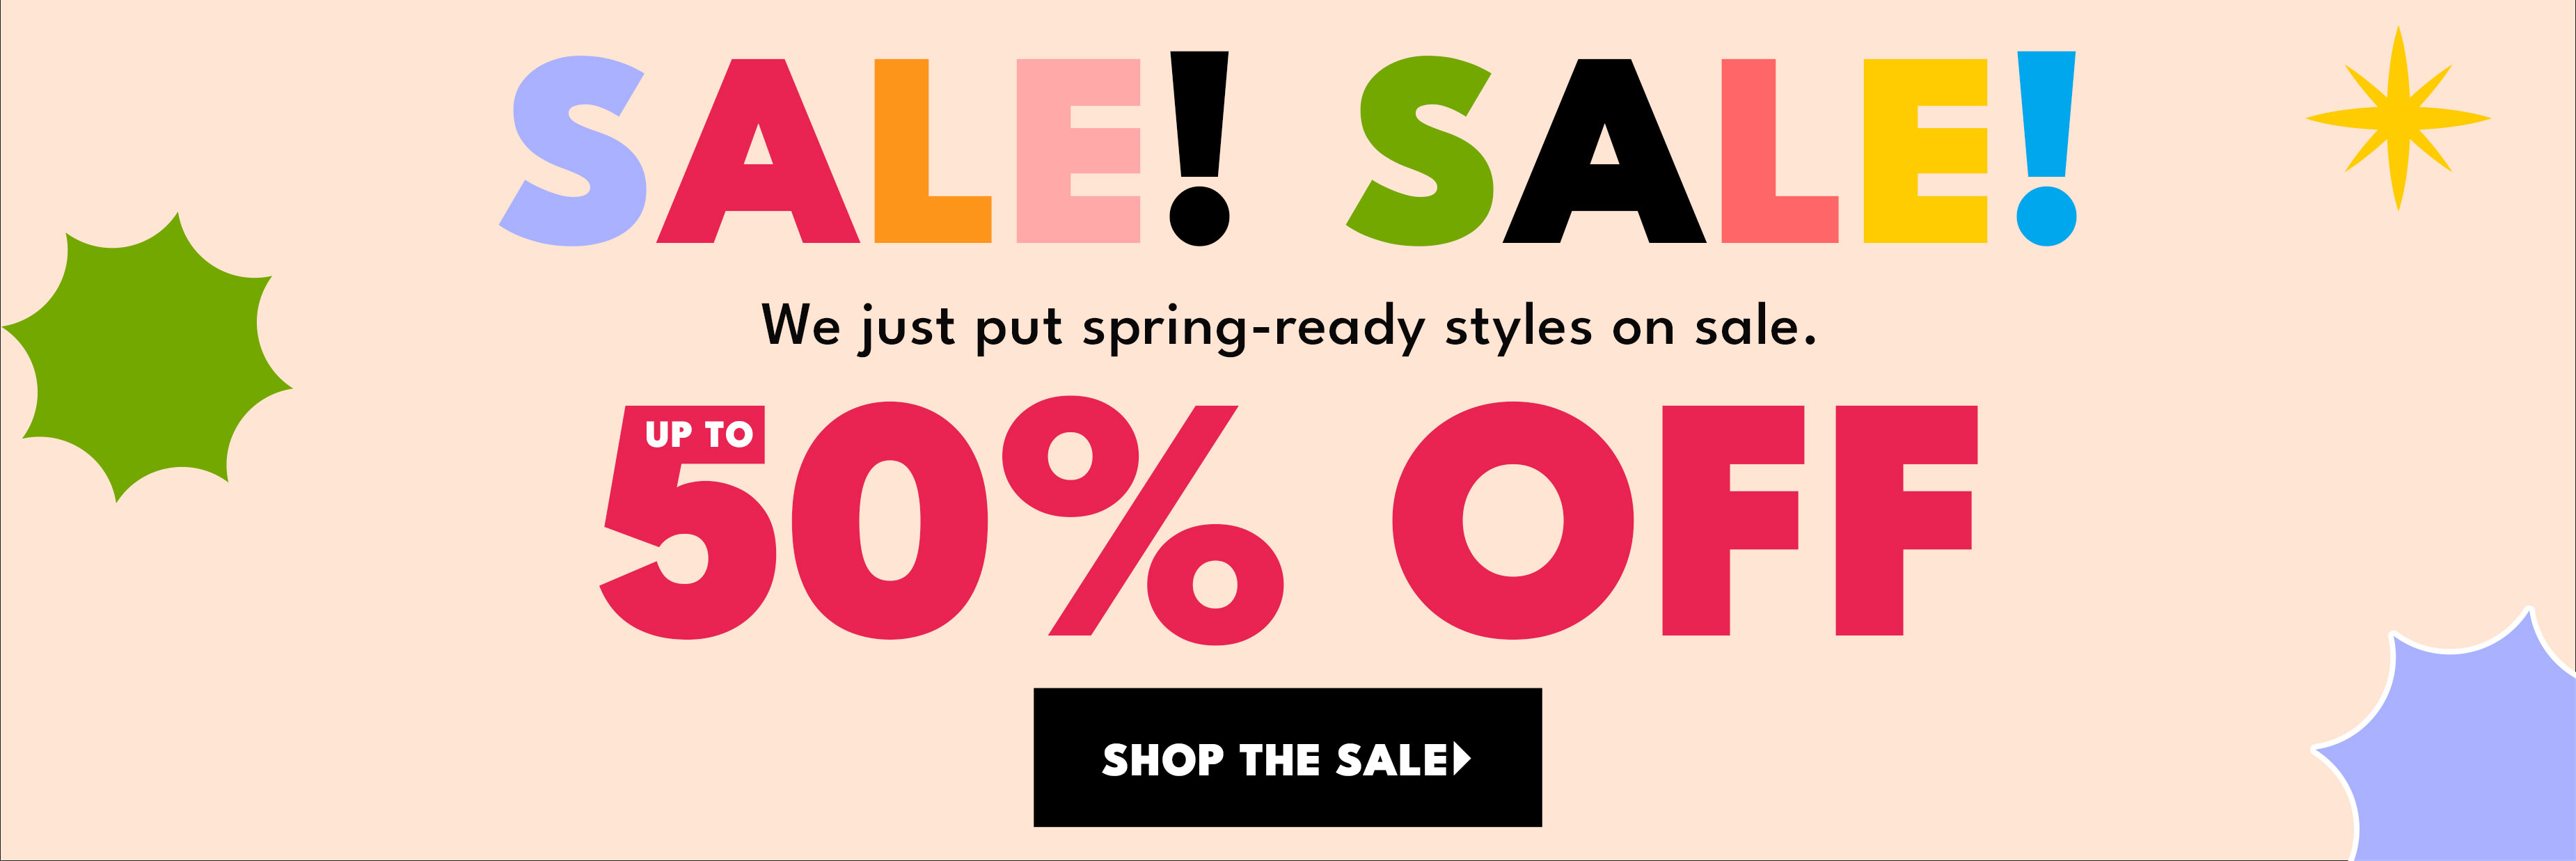 Sale! Sale! we just put spring ready styles on ale up to 50% off shop the sale